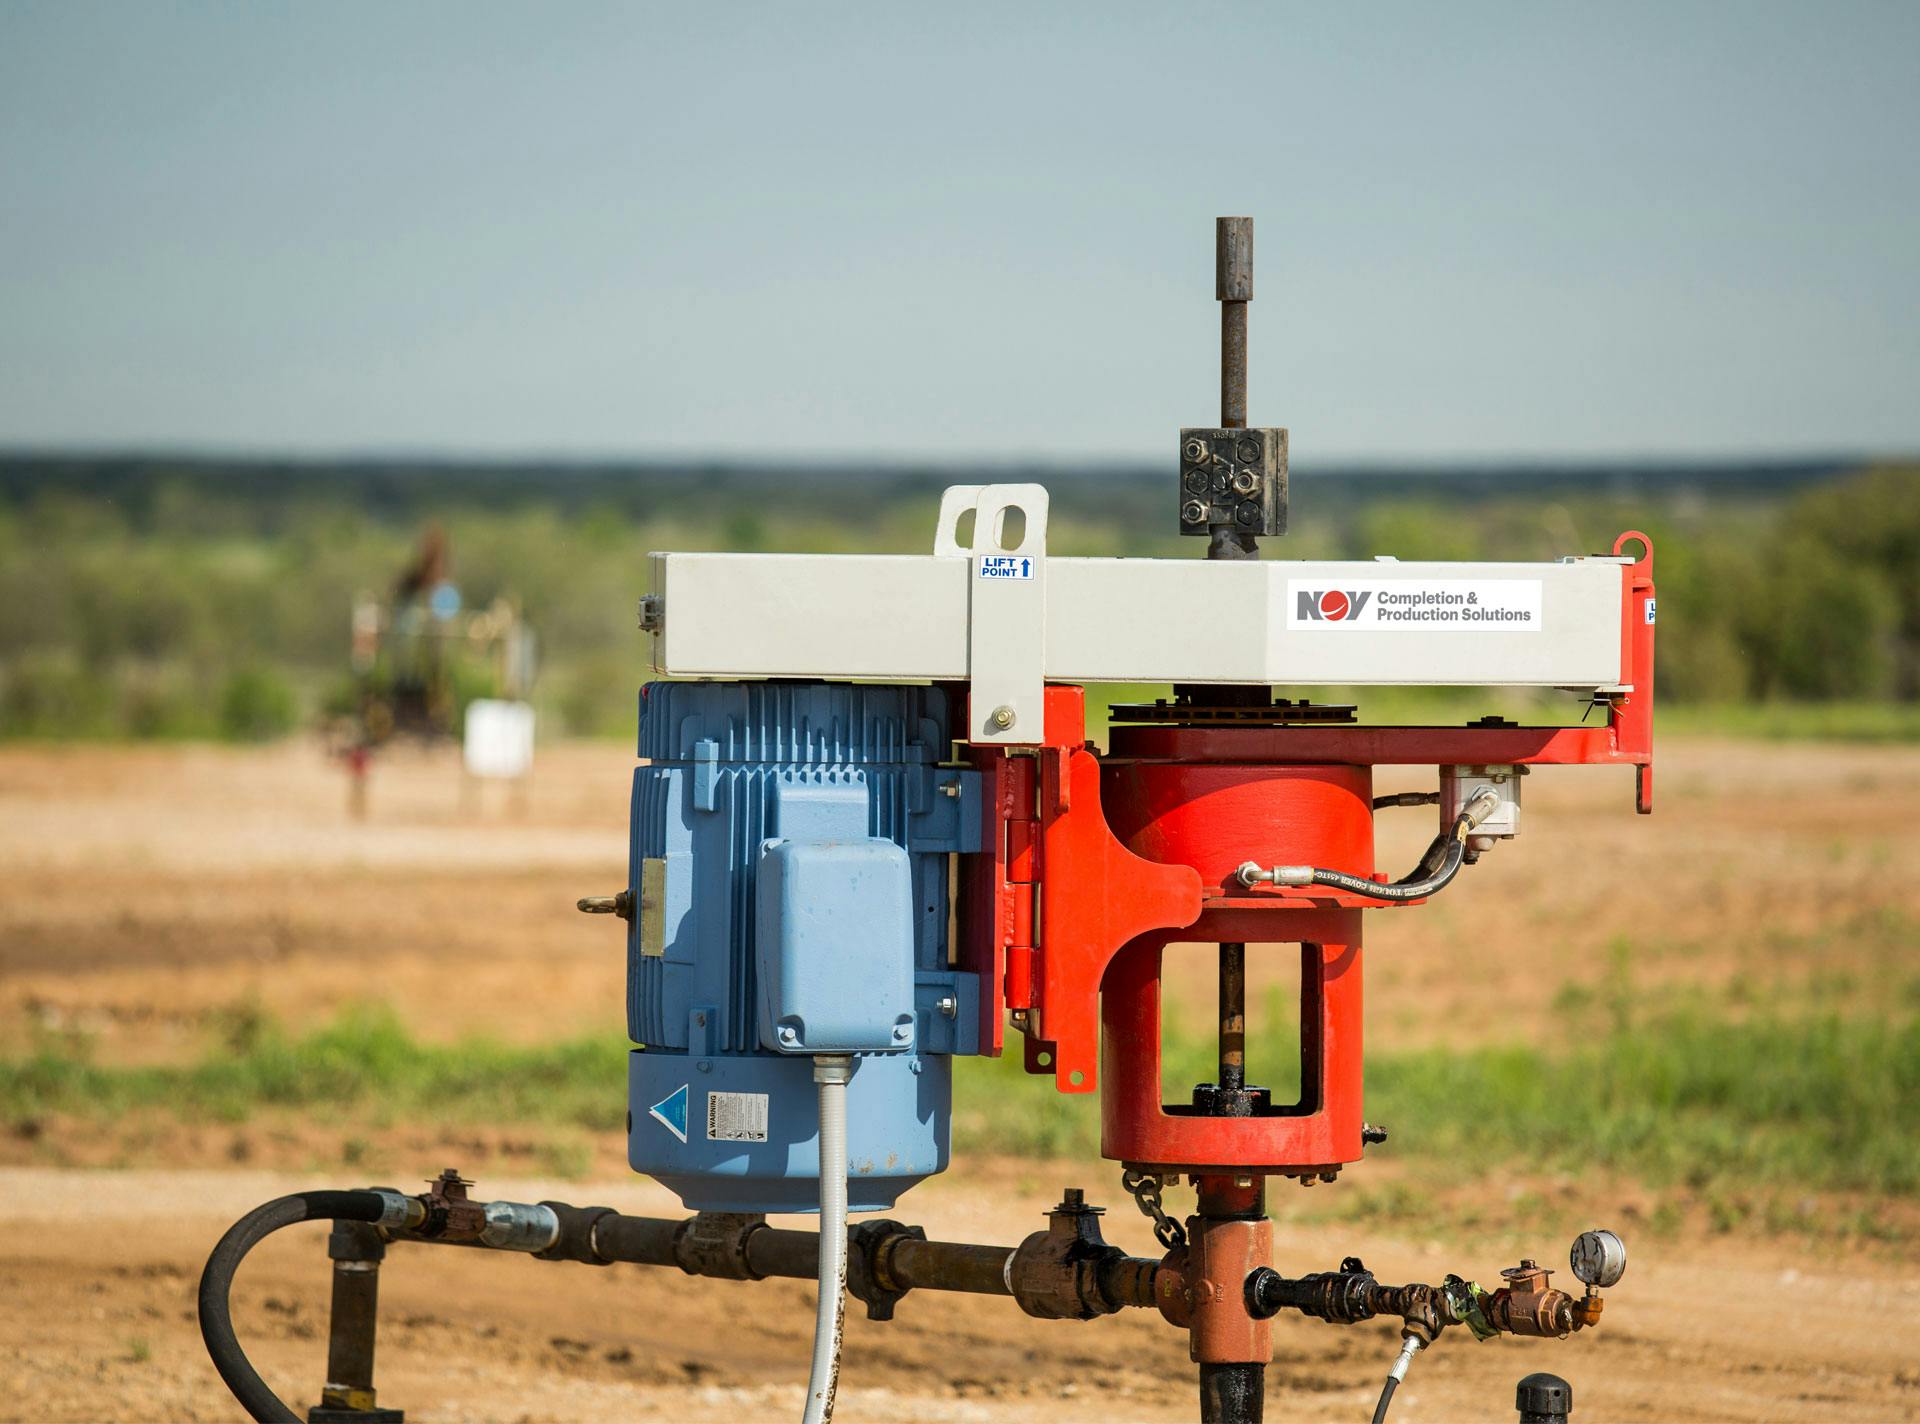 Image of an Electric Driveheads Oil Frame in a field